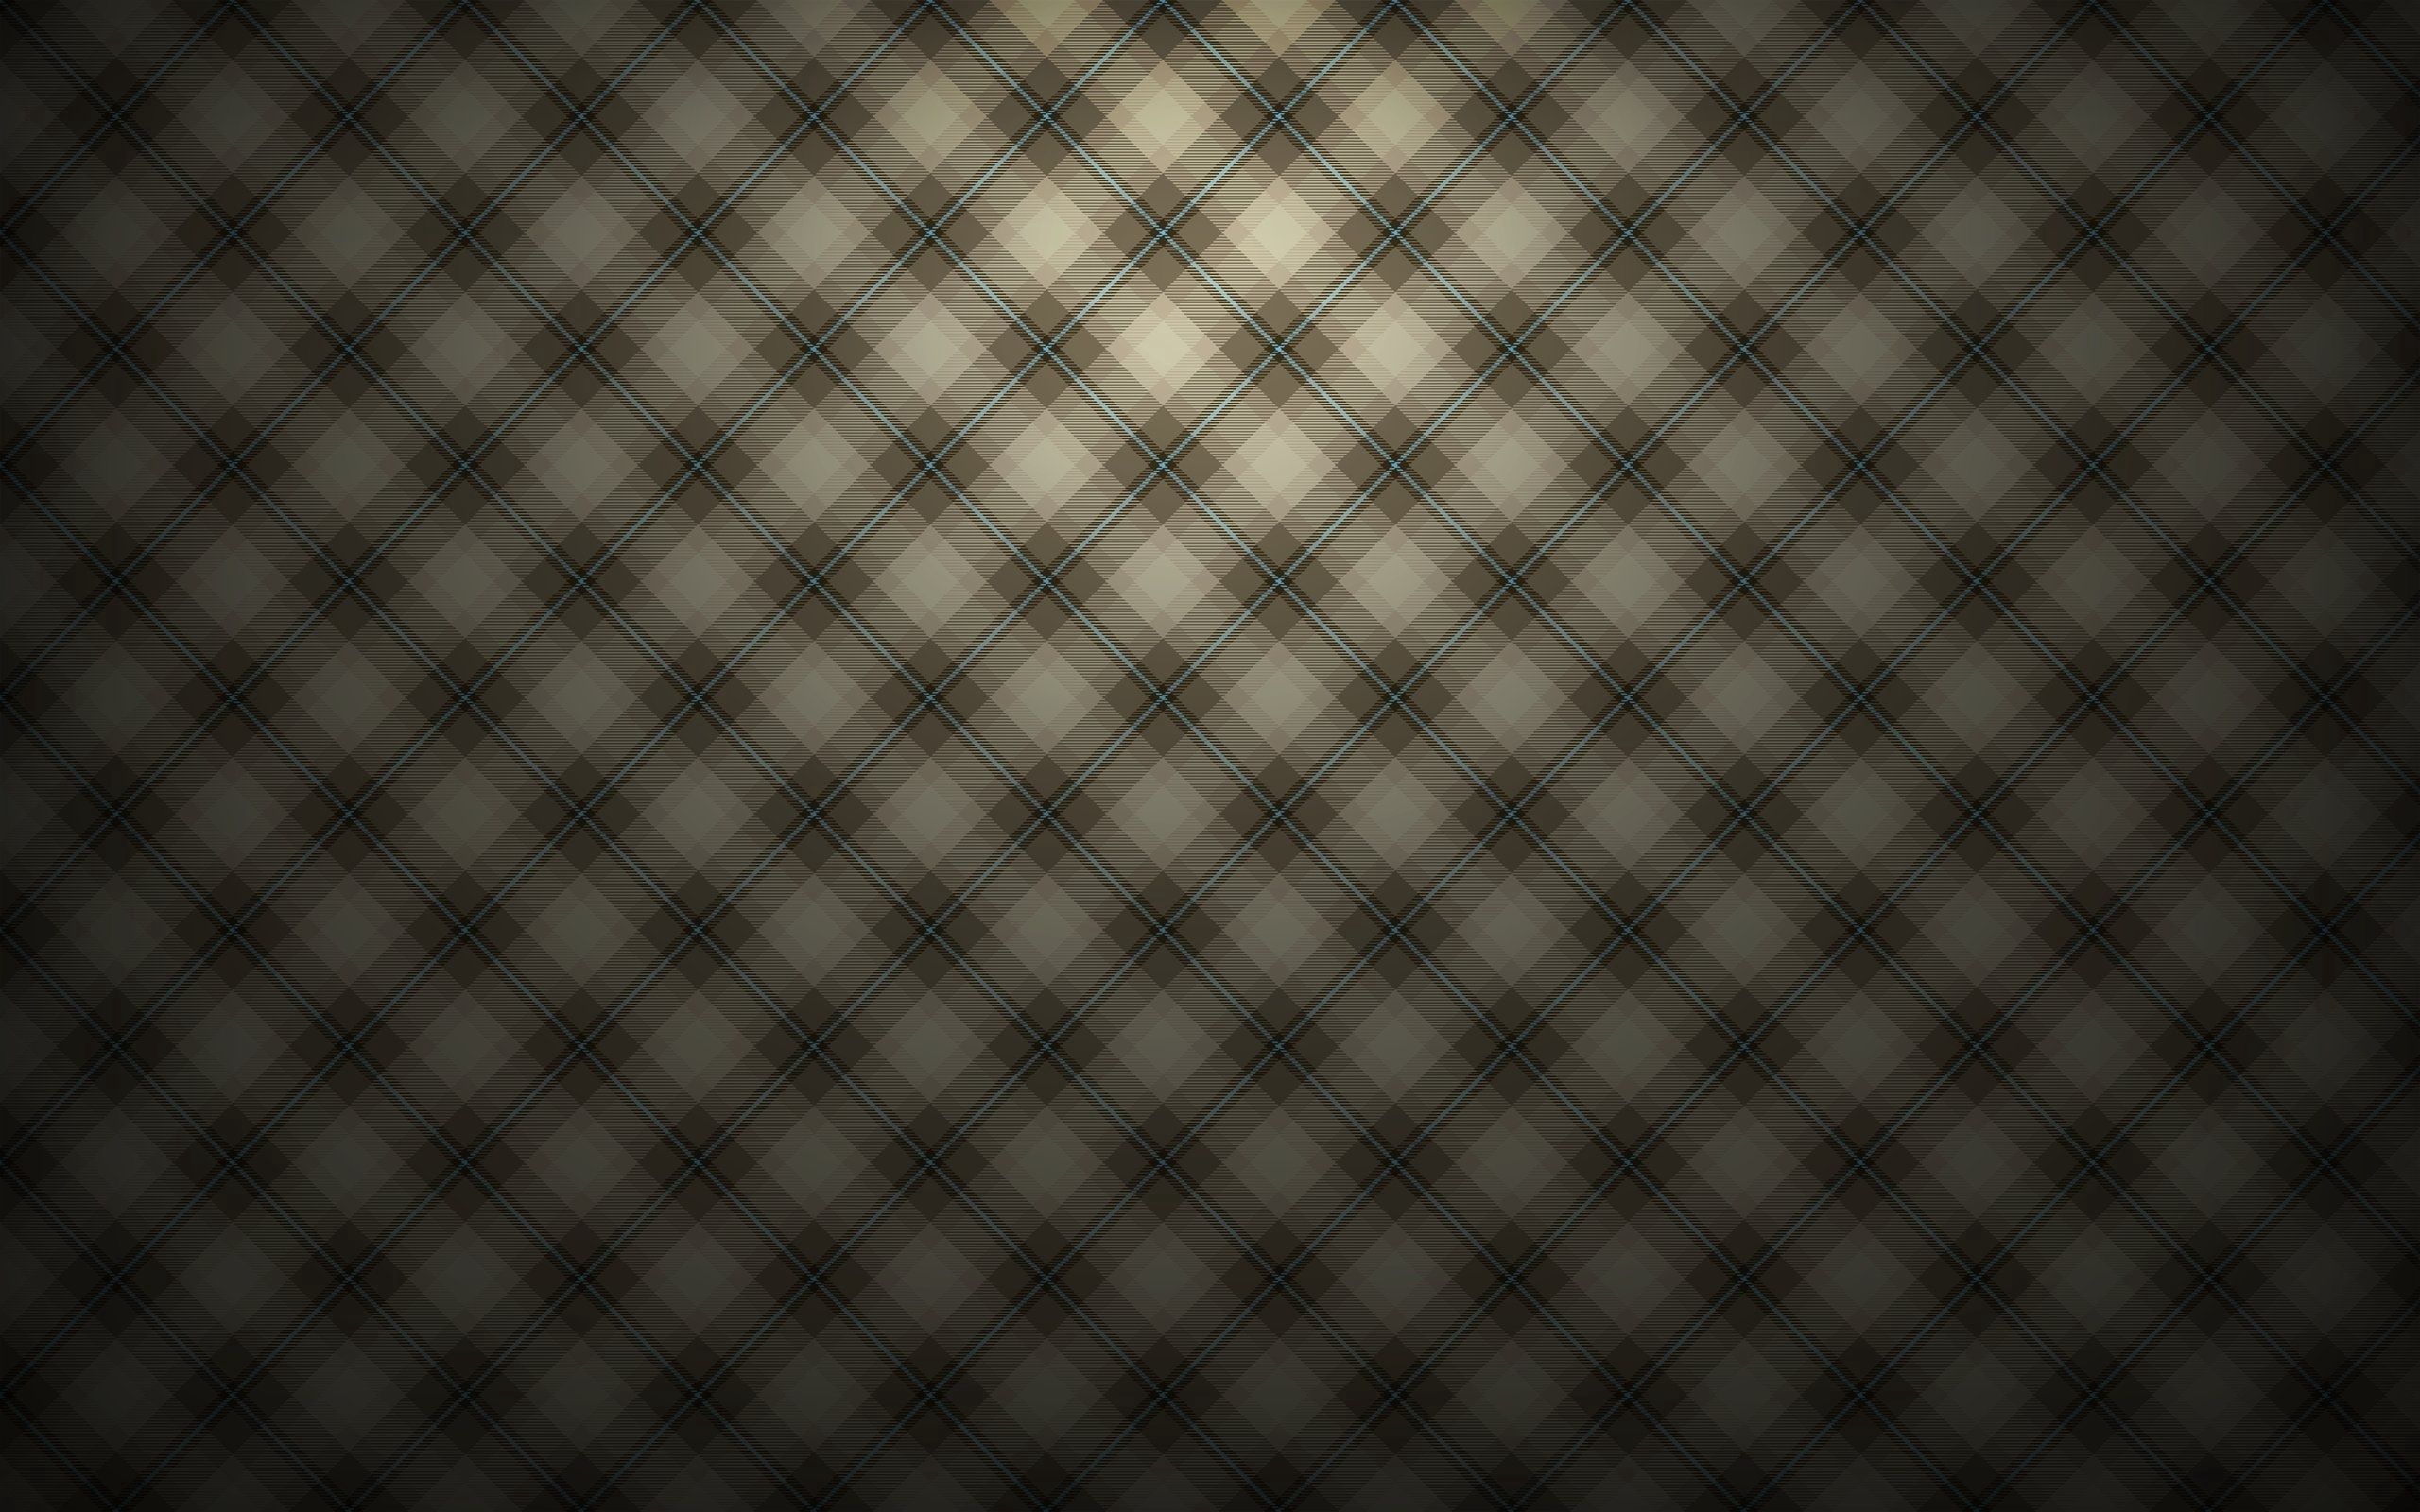 65885 download wallpaper textures, grid, stripes, background, texture, shadow, streaks, obliquely screensavers and pictures for free